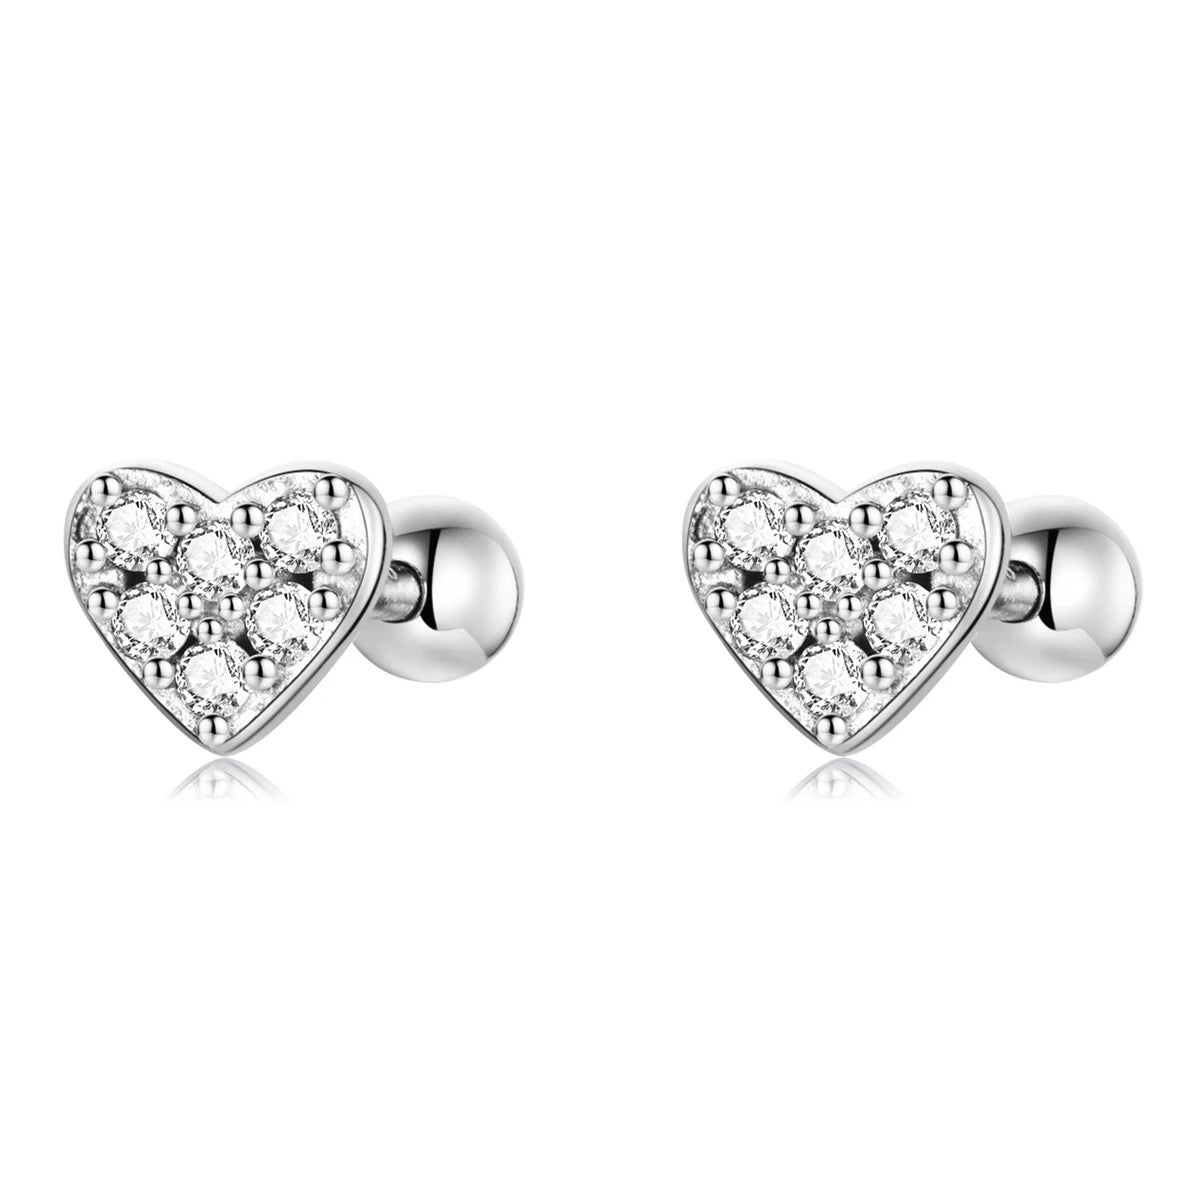 925 Sterling Silver Platinum Plated Pave CZ Stones Heart Screw Back Earrings for Baby. Kids & Teens